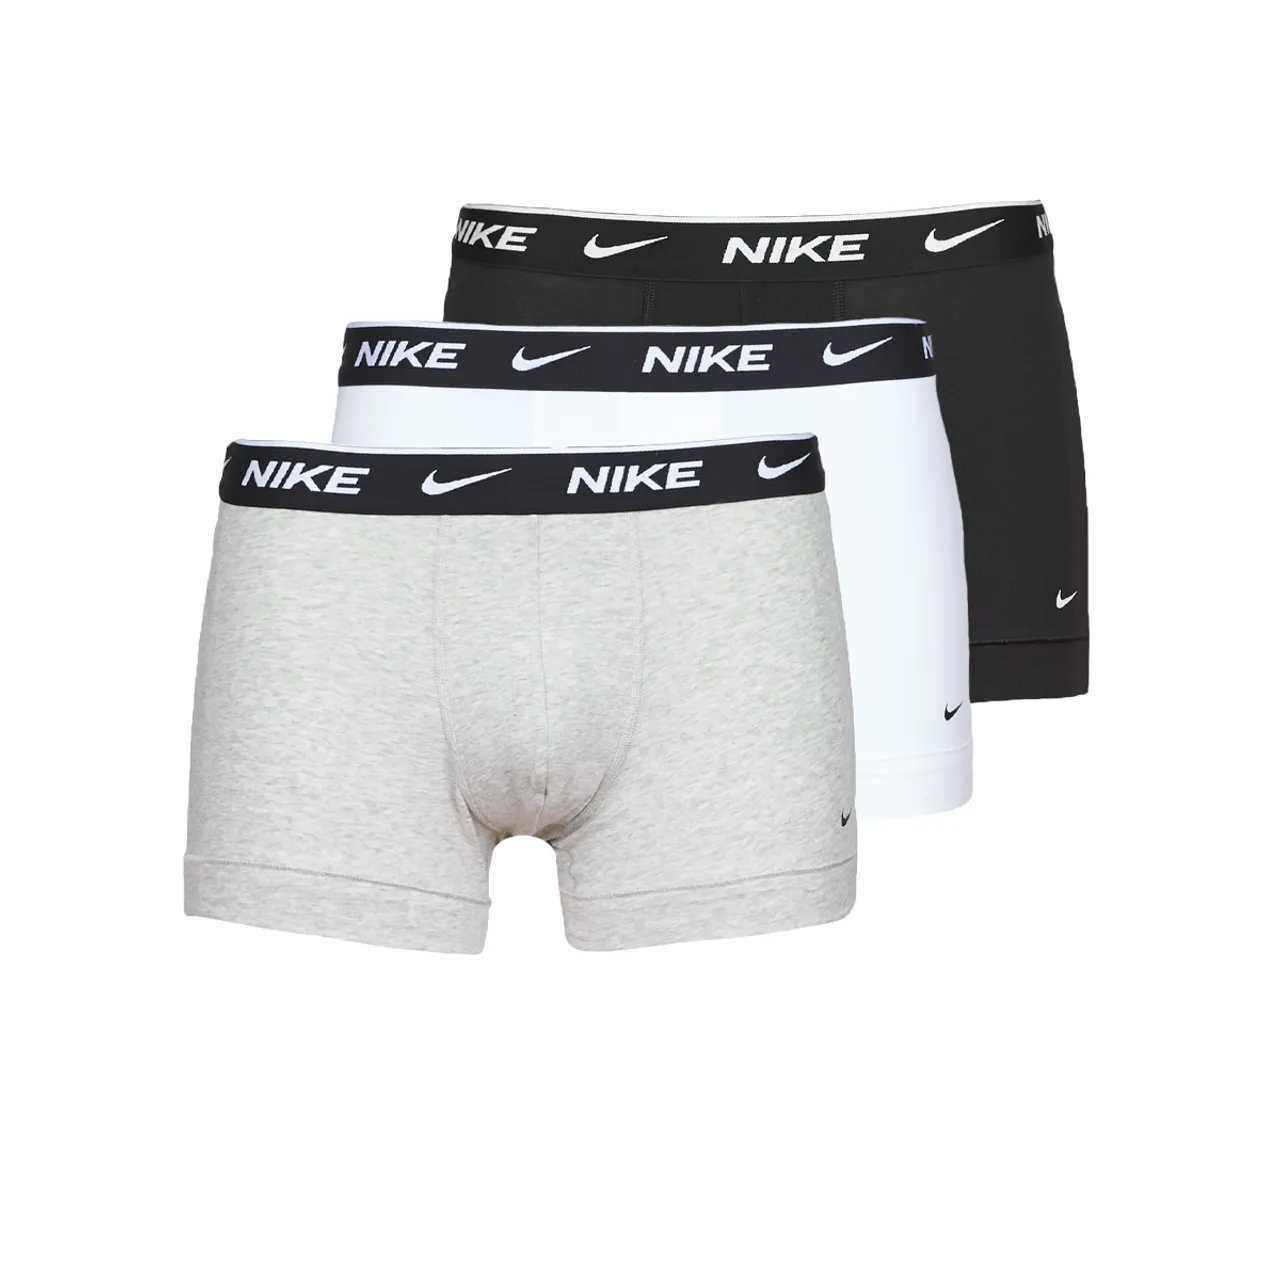 Nike  EVERYDAY COTTON STRETCH X3  men's Boxer shorts in Black